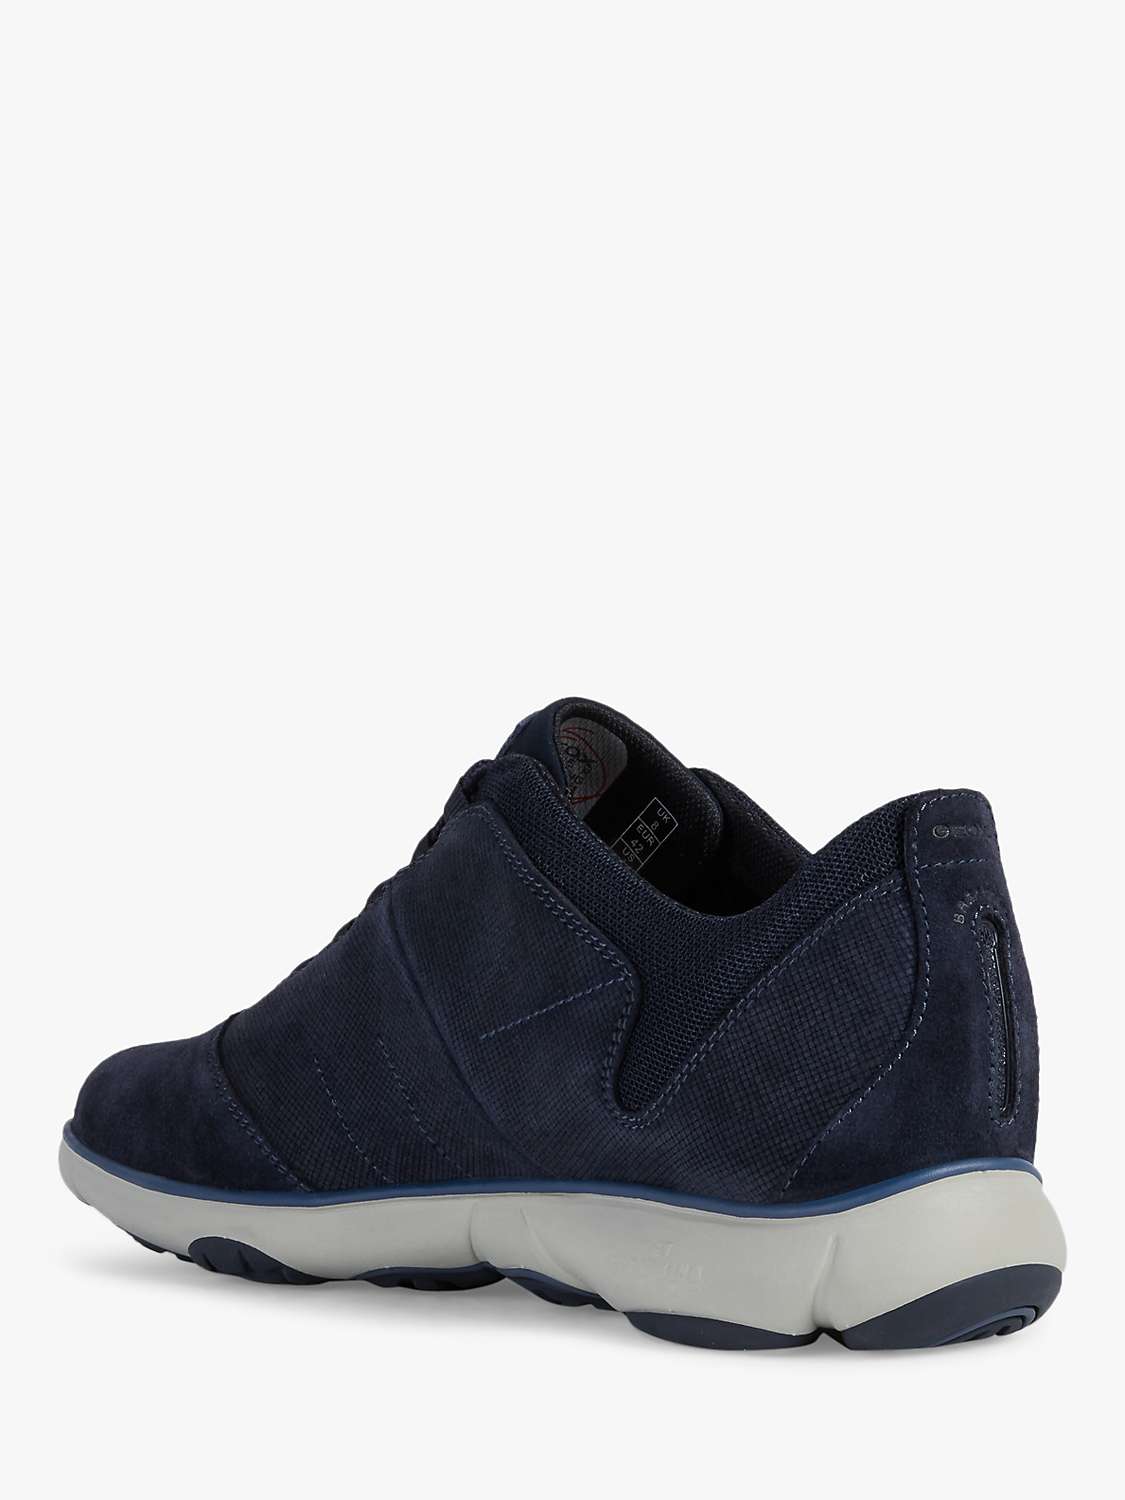 Buy Geox Nebula Breathable Trainers, Navy Online at johnlewis.com